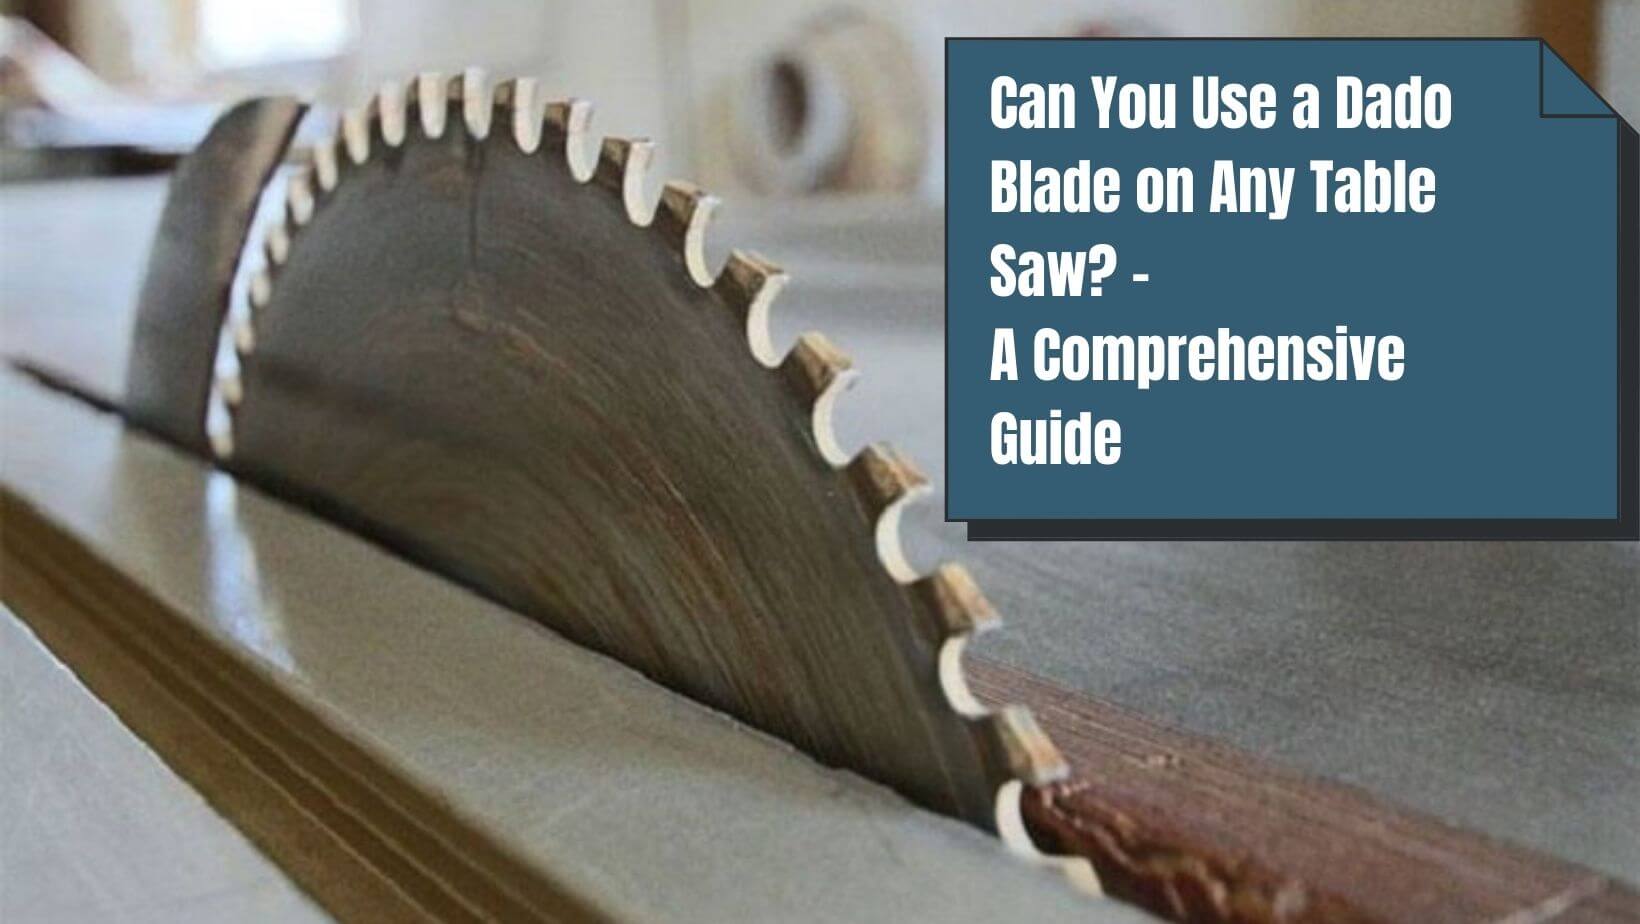 Can you use a dado blade on any table saw